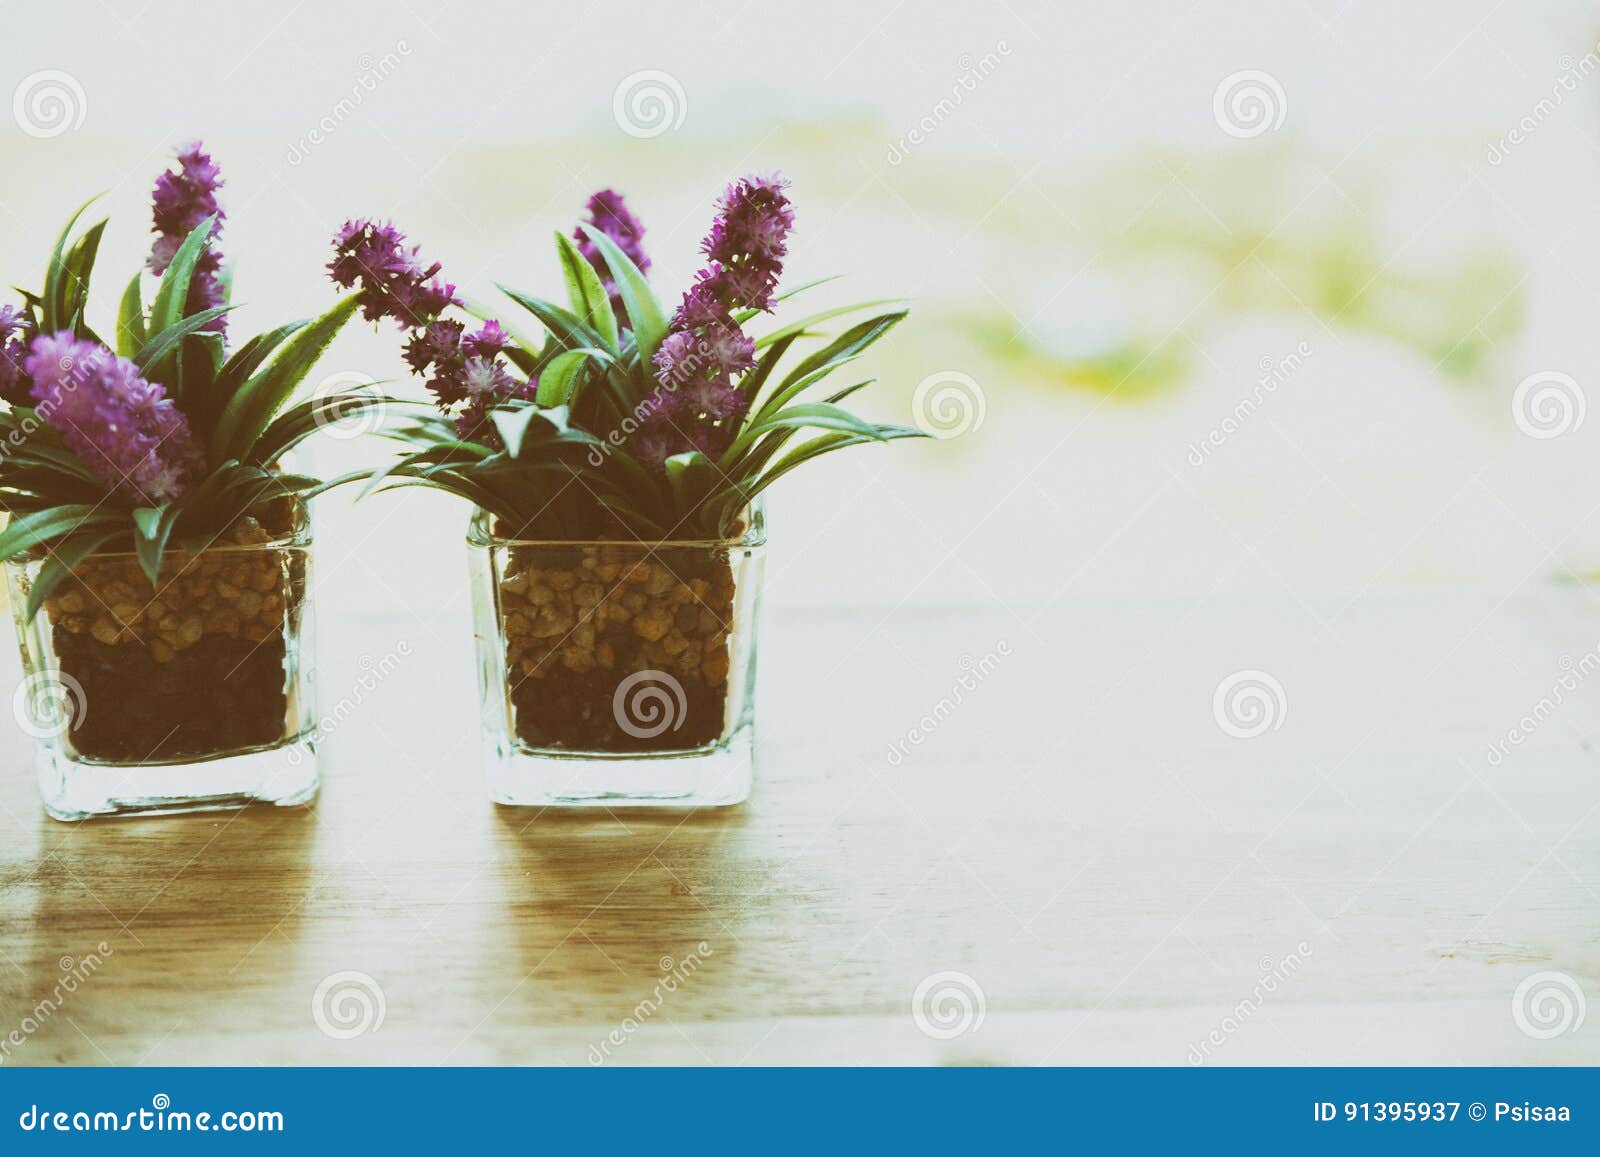 Artificial Flower In Small Glass Pot On A Wooden Table Stock